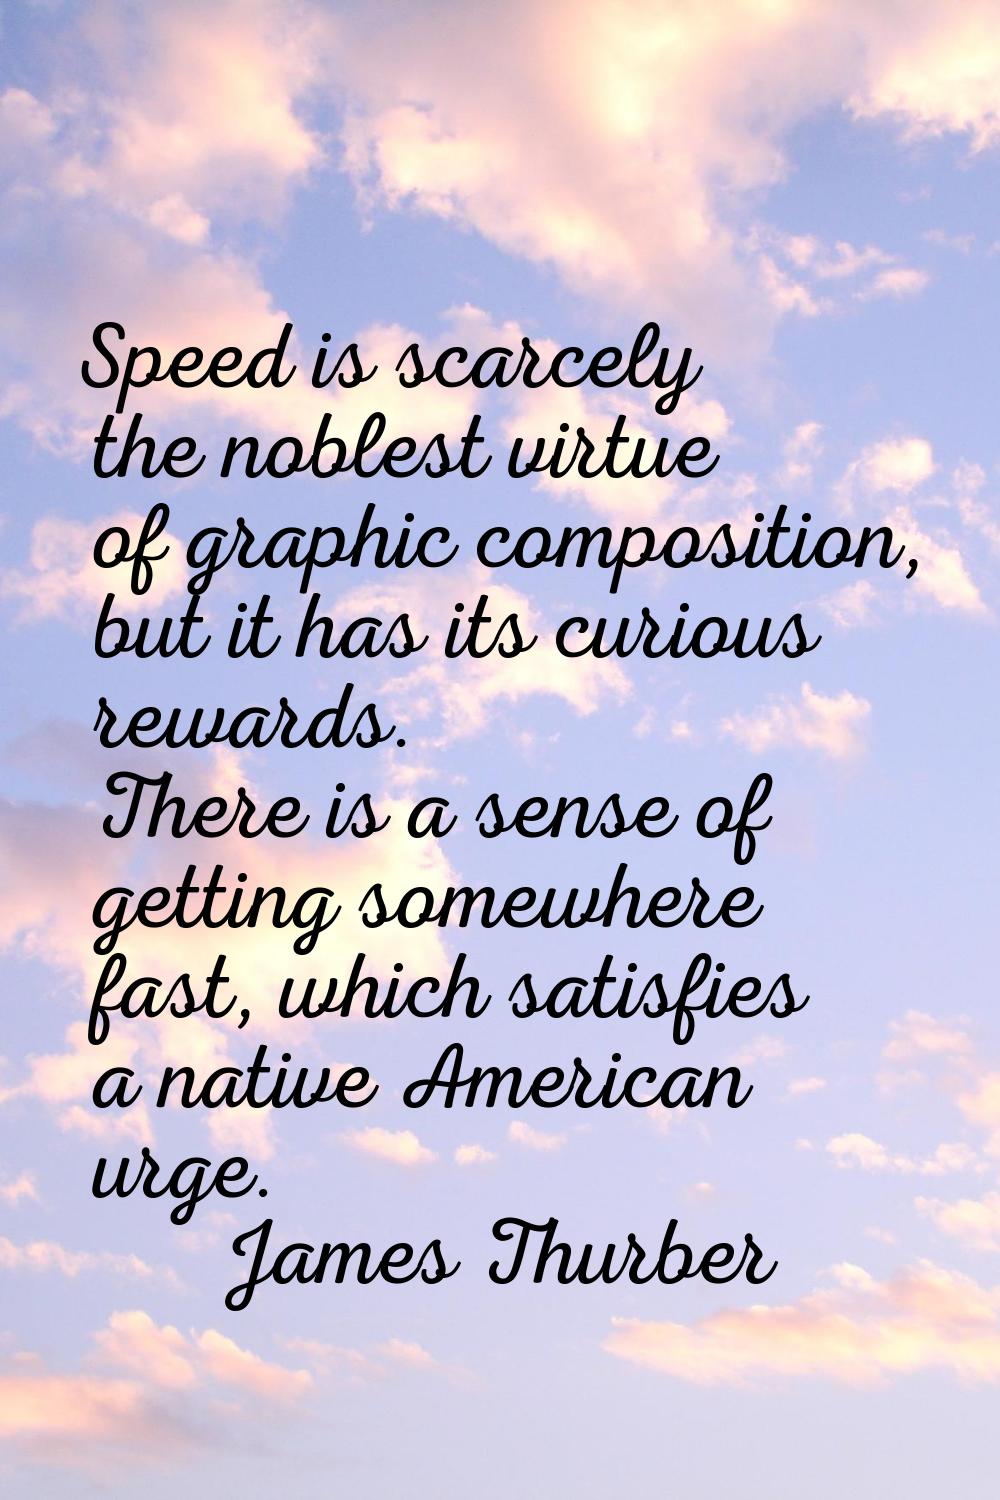 Speed is scarcely the noblest virtue of graphic composition, but it has its curious rewards. There 